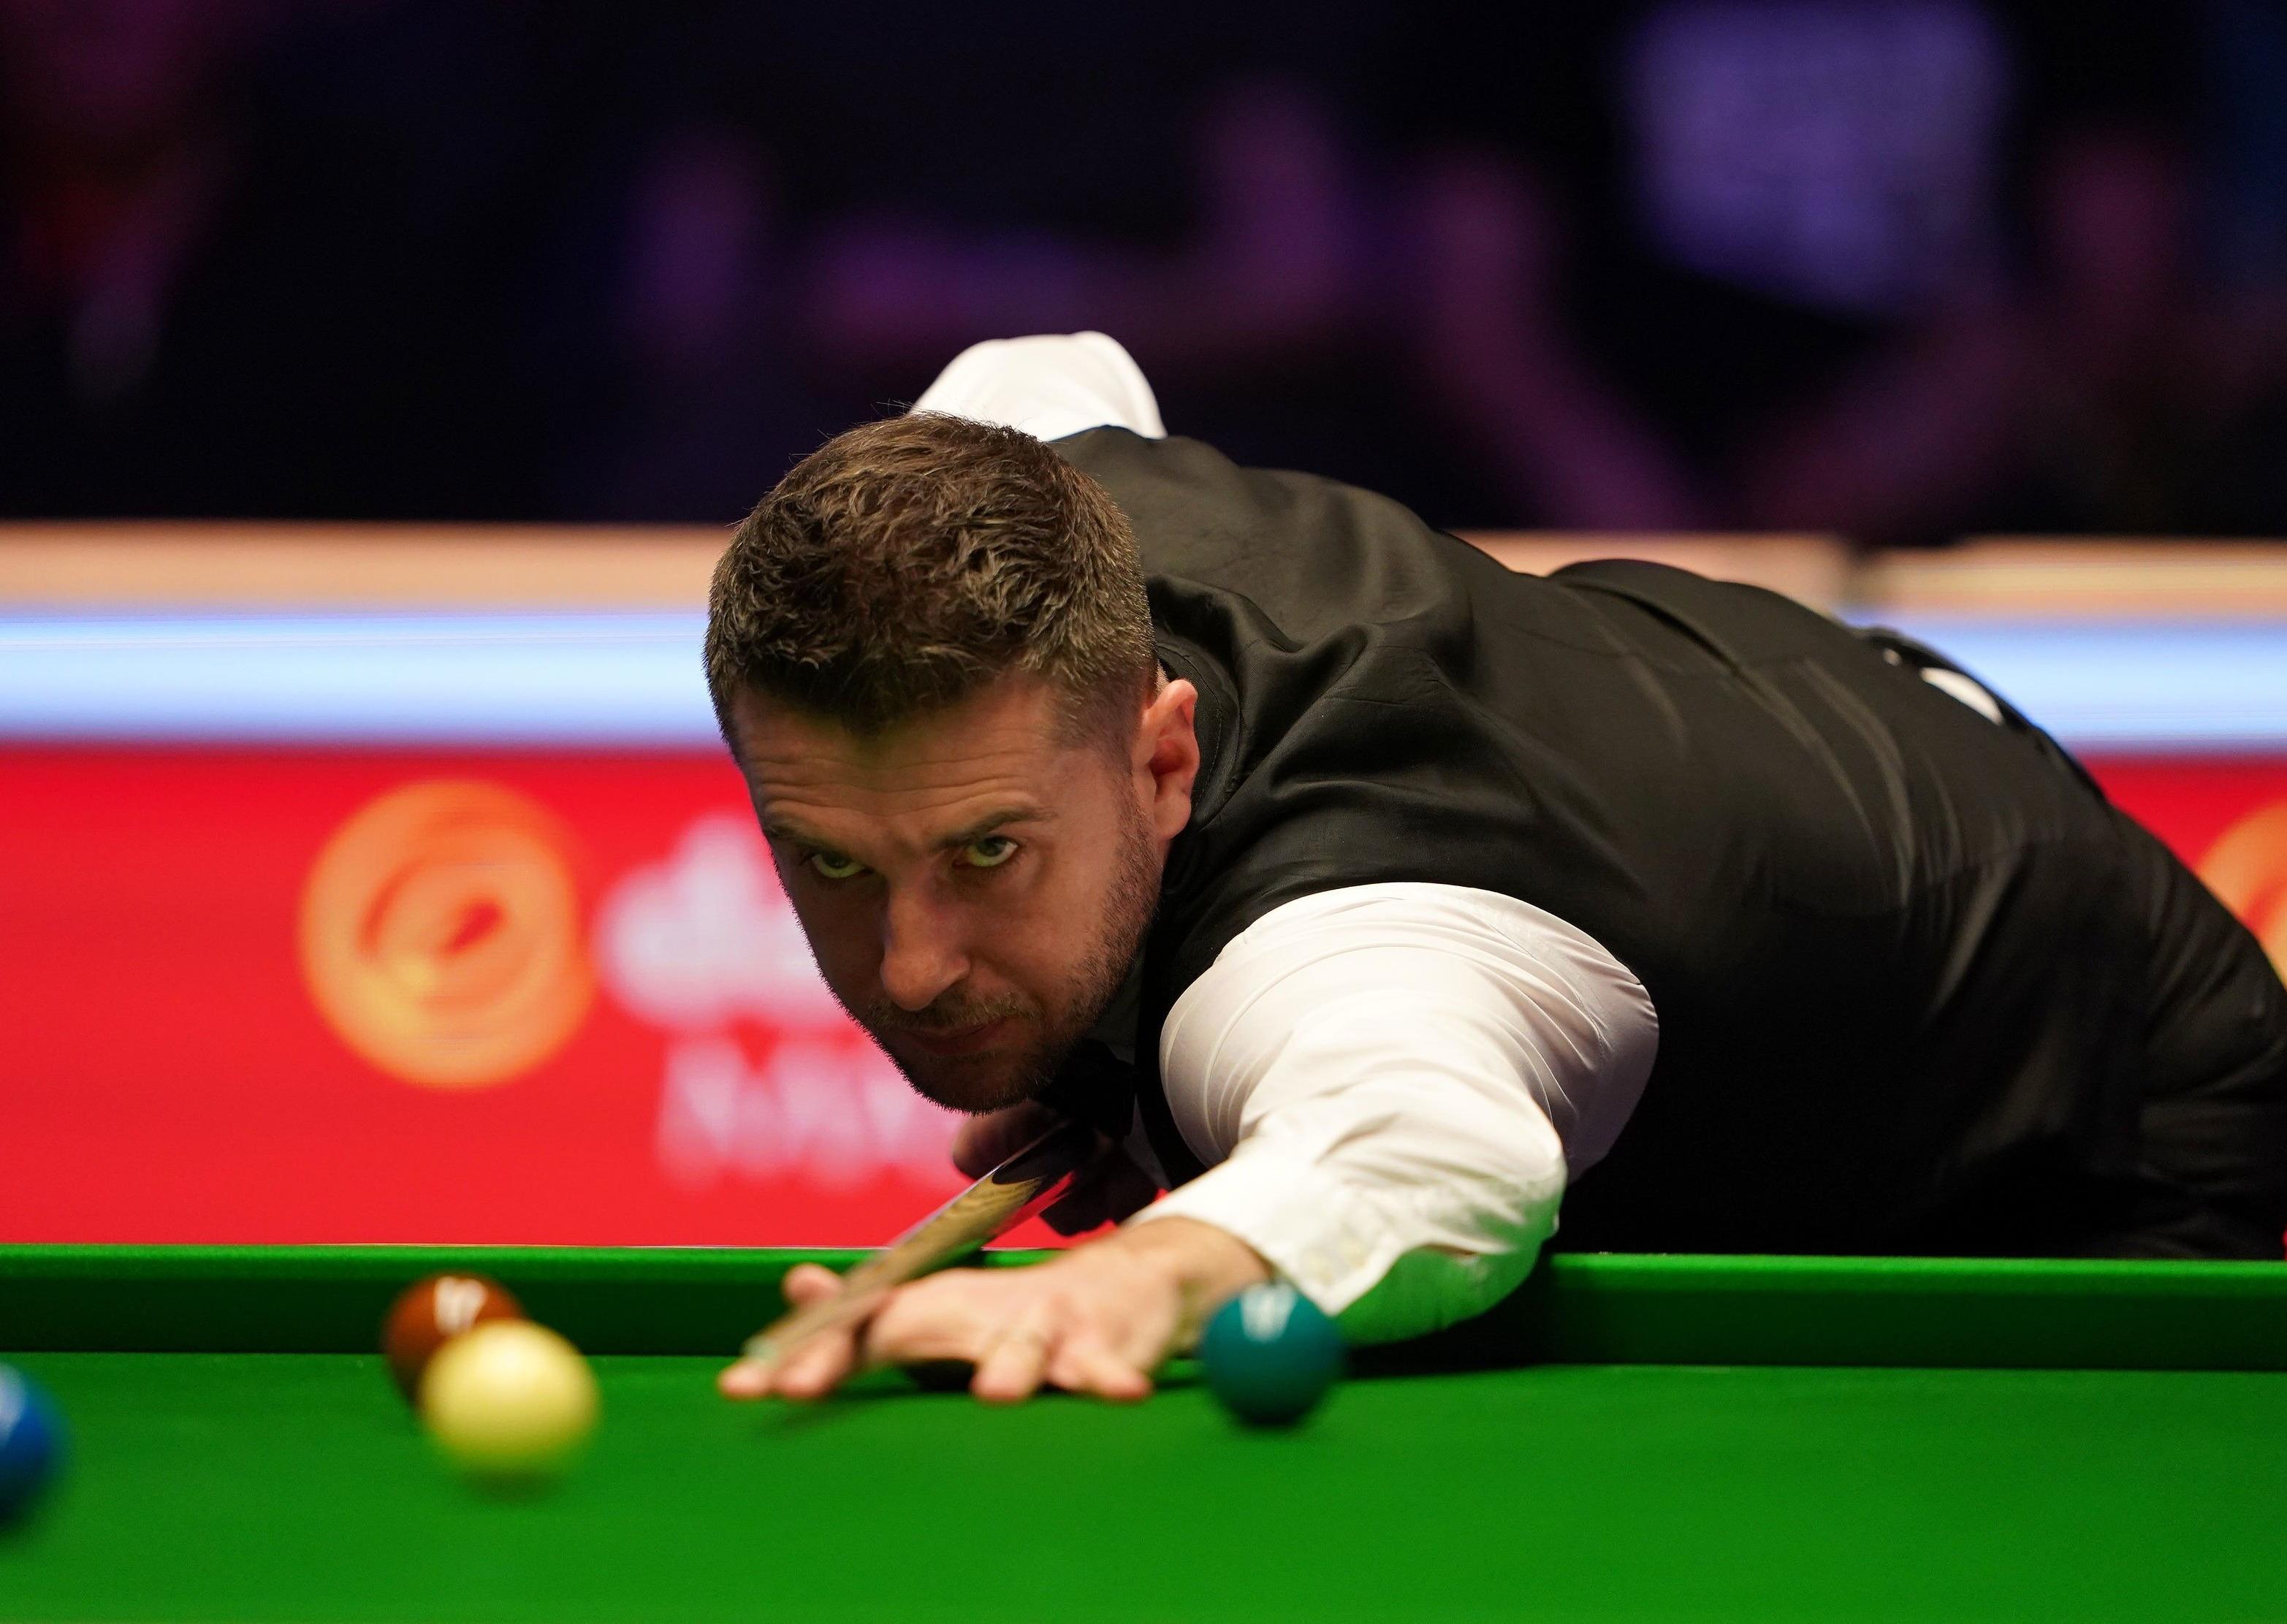 Ronnie OSullivan warns rivals Mark Selby and Neil Robertson that the window is closing on glory years